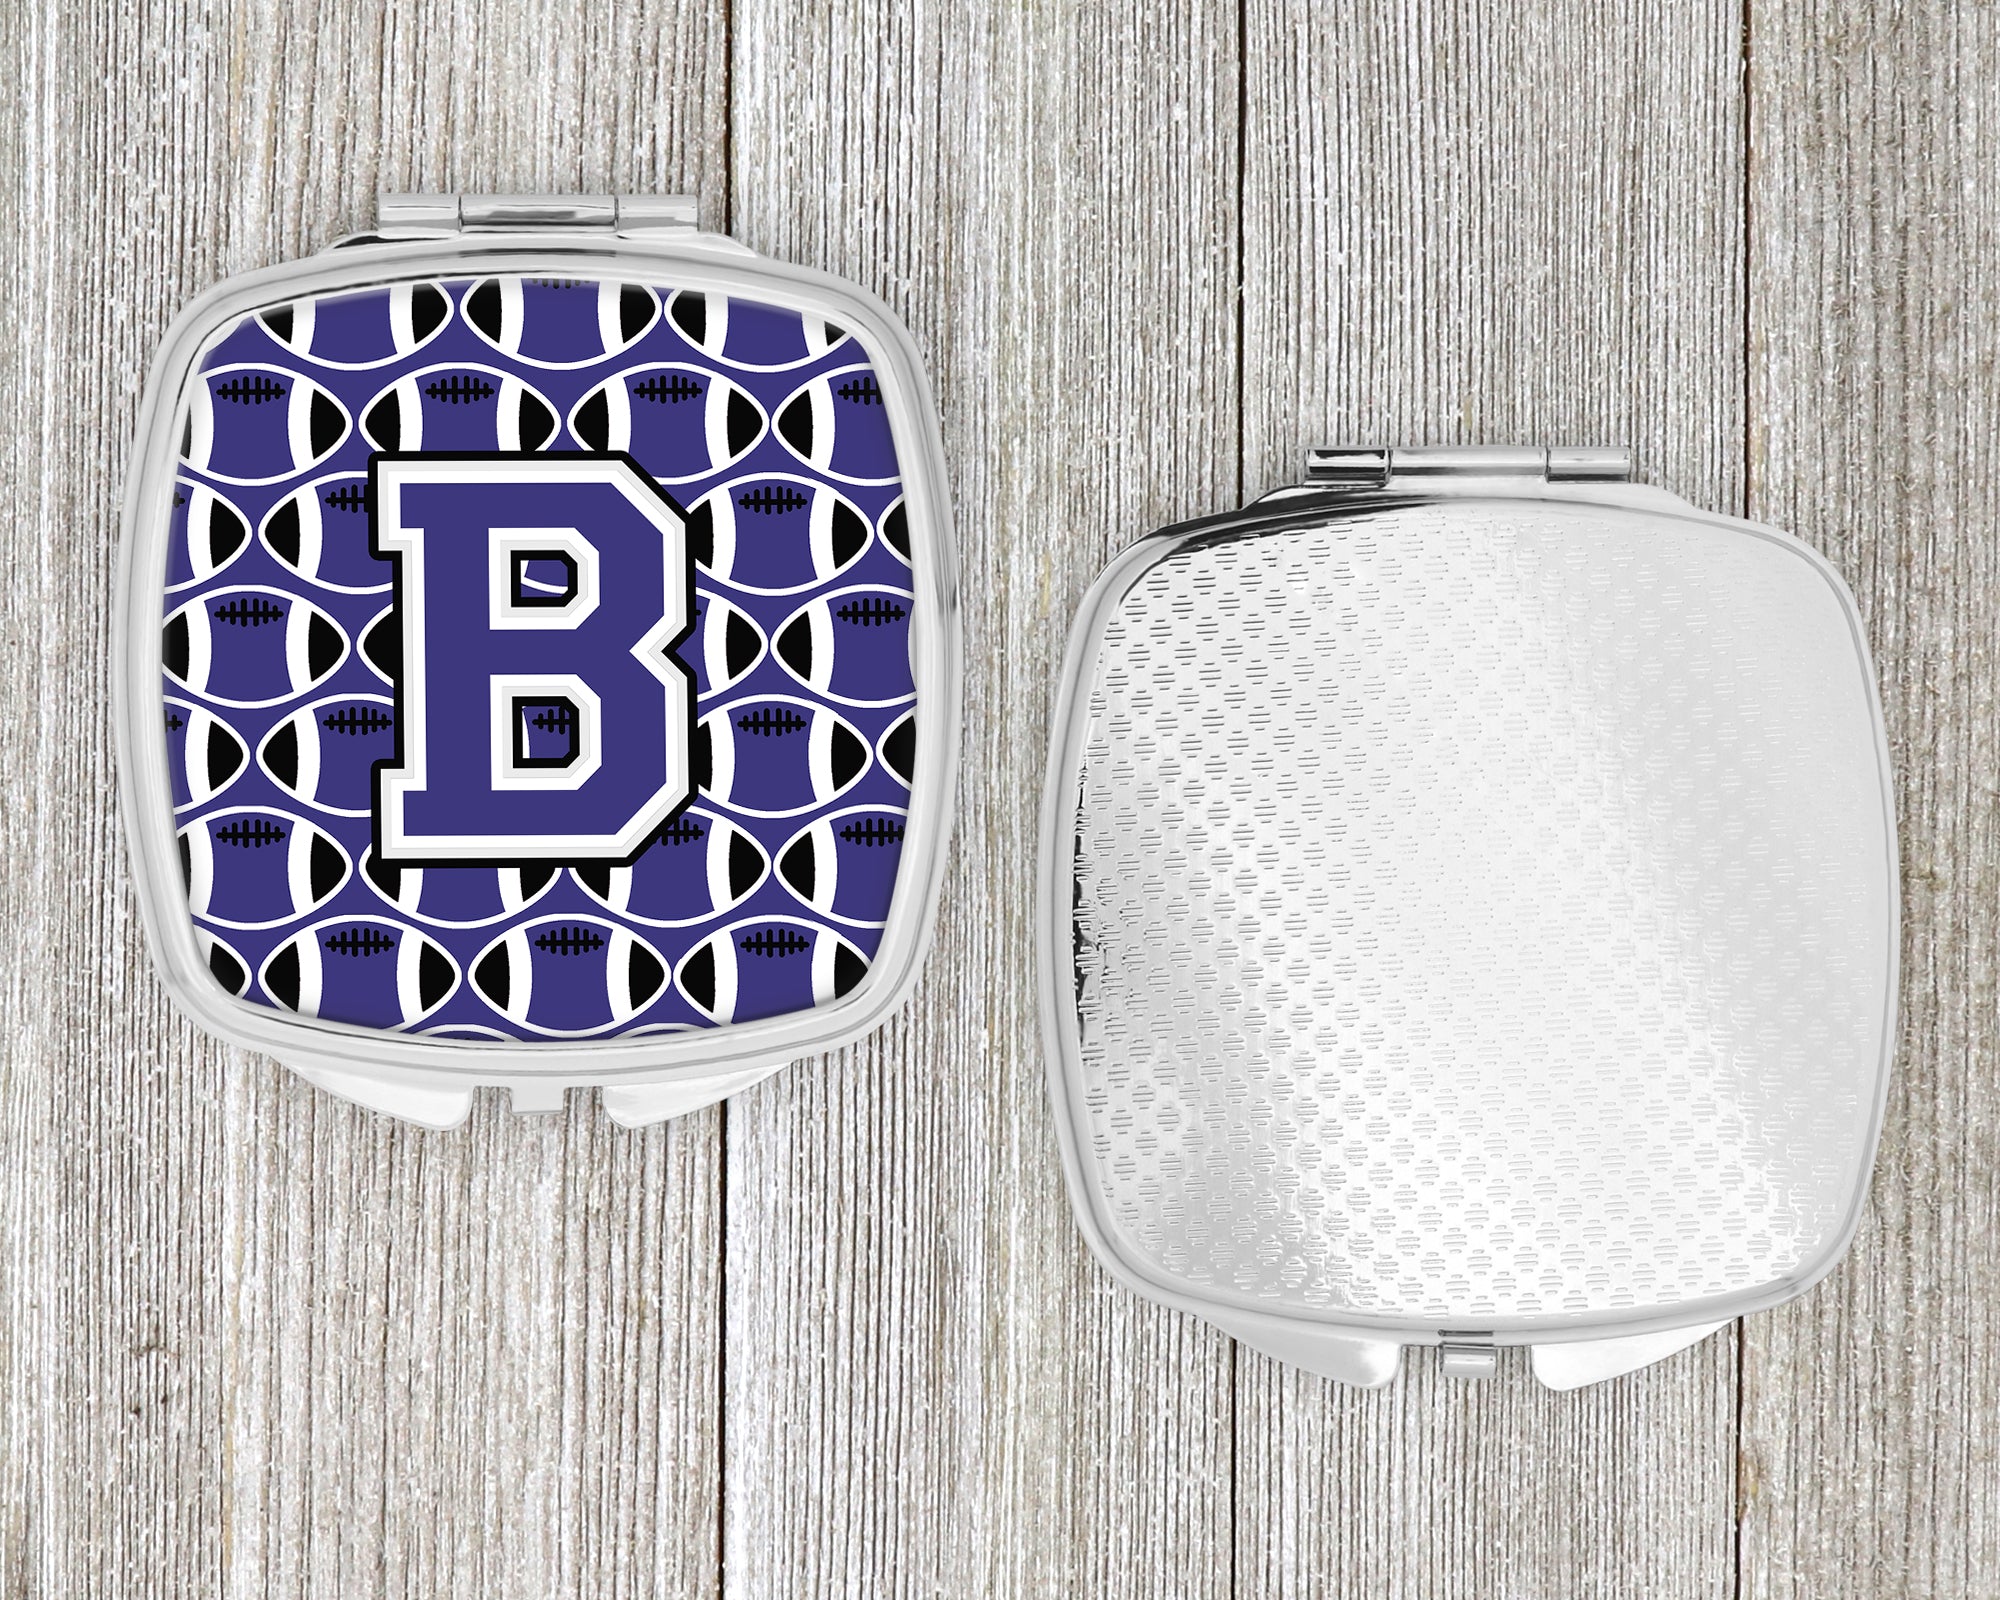 Letter B Football Purple and White Compact Mirror CJ1068-BSCM  the-store.com.